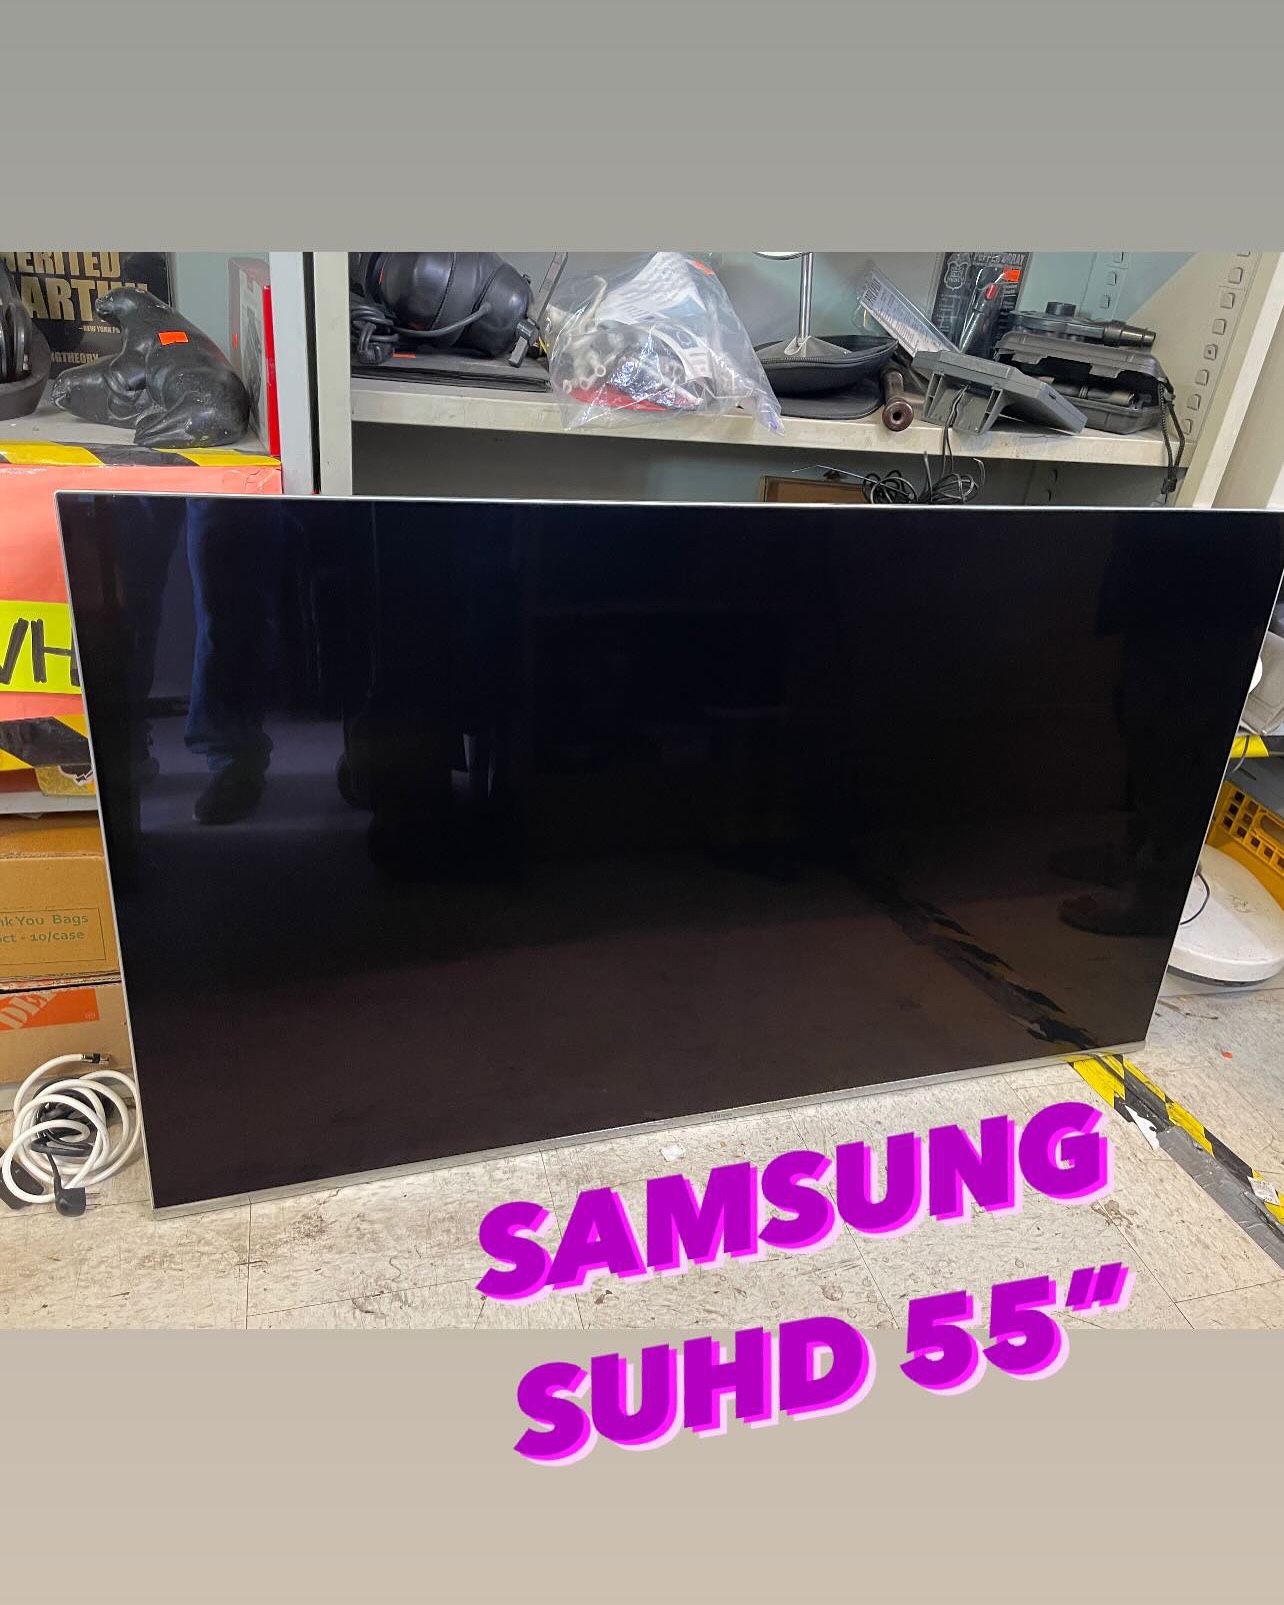 SAMSUNG SUHD 4K 55” Inch SMART Tv Television KS8000 Series WORKS PERFECT WITH REMOTE AND WALL MOUNT